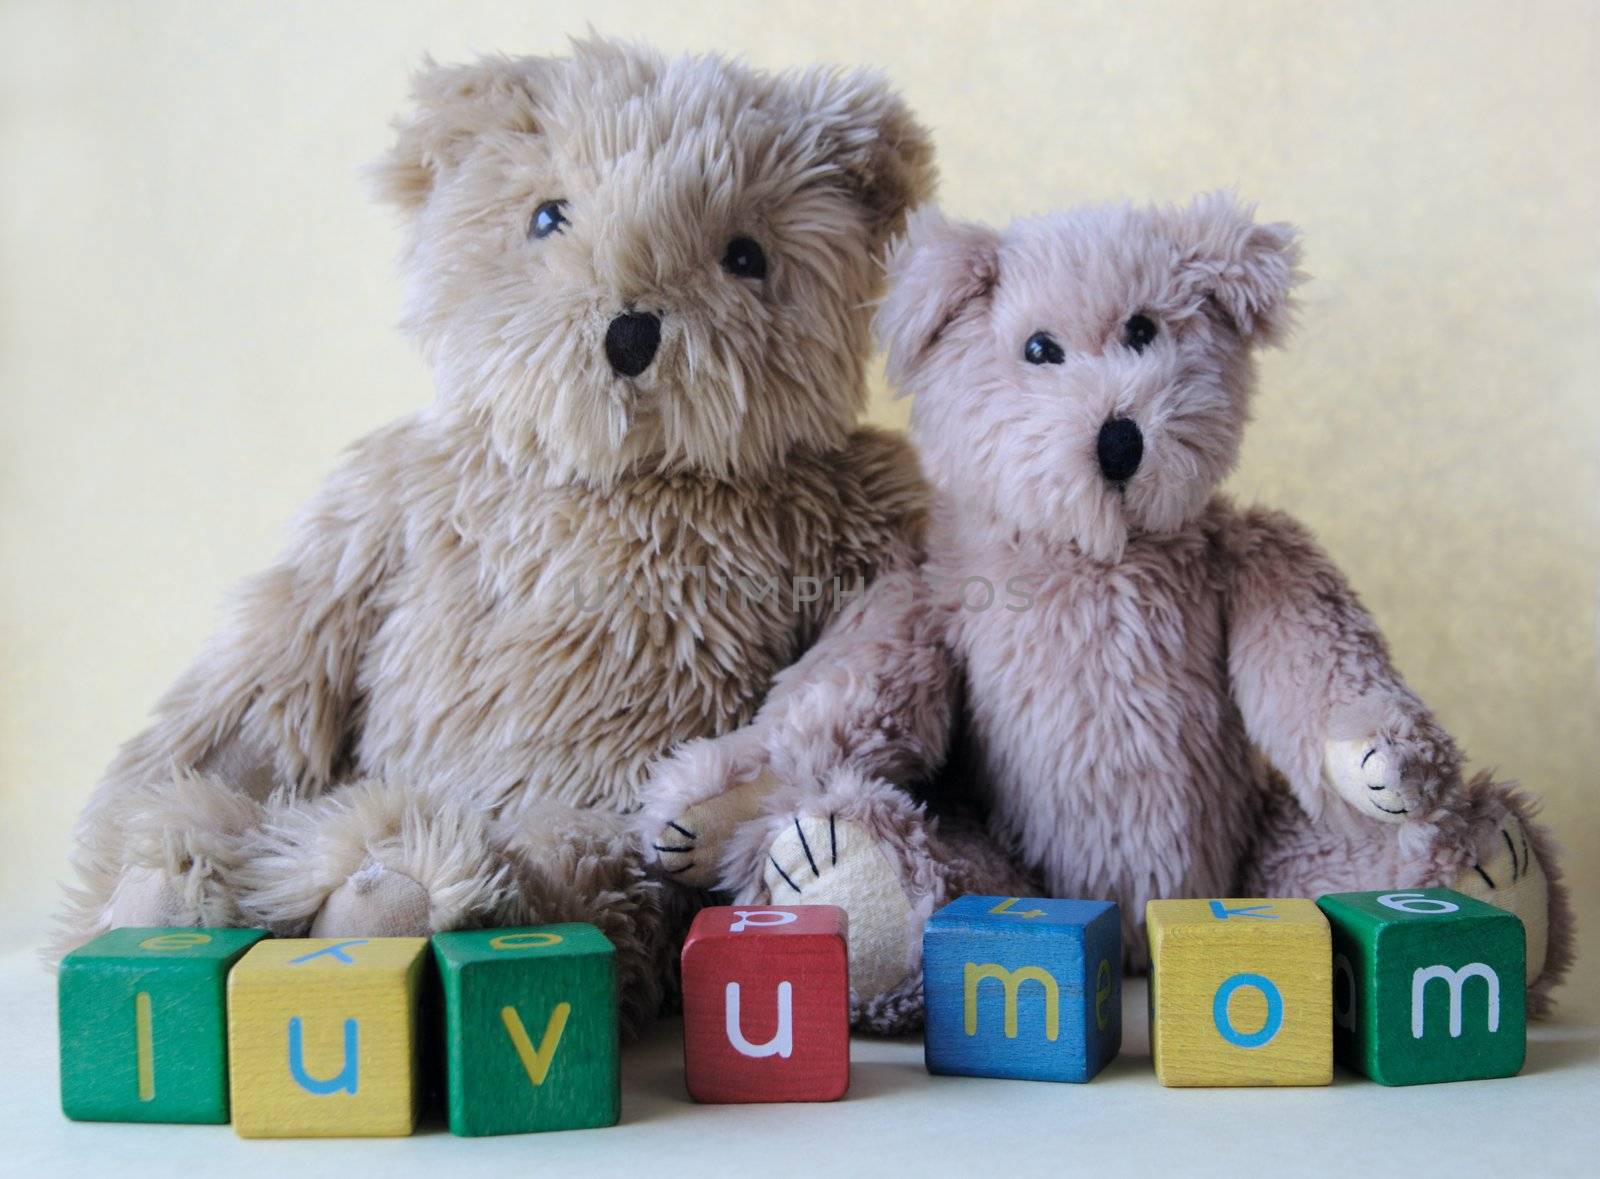 two much-loved teddy bears with colorful blocks spelling 'luv u mom'